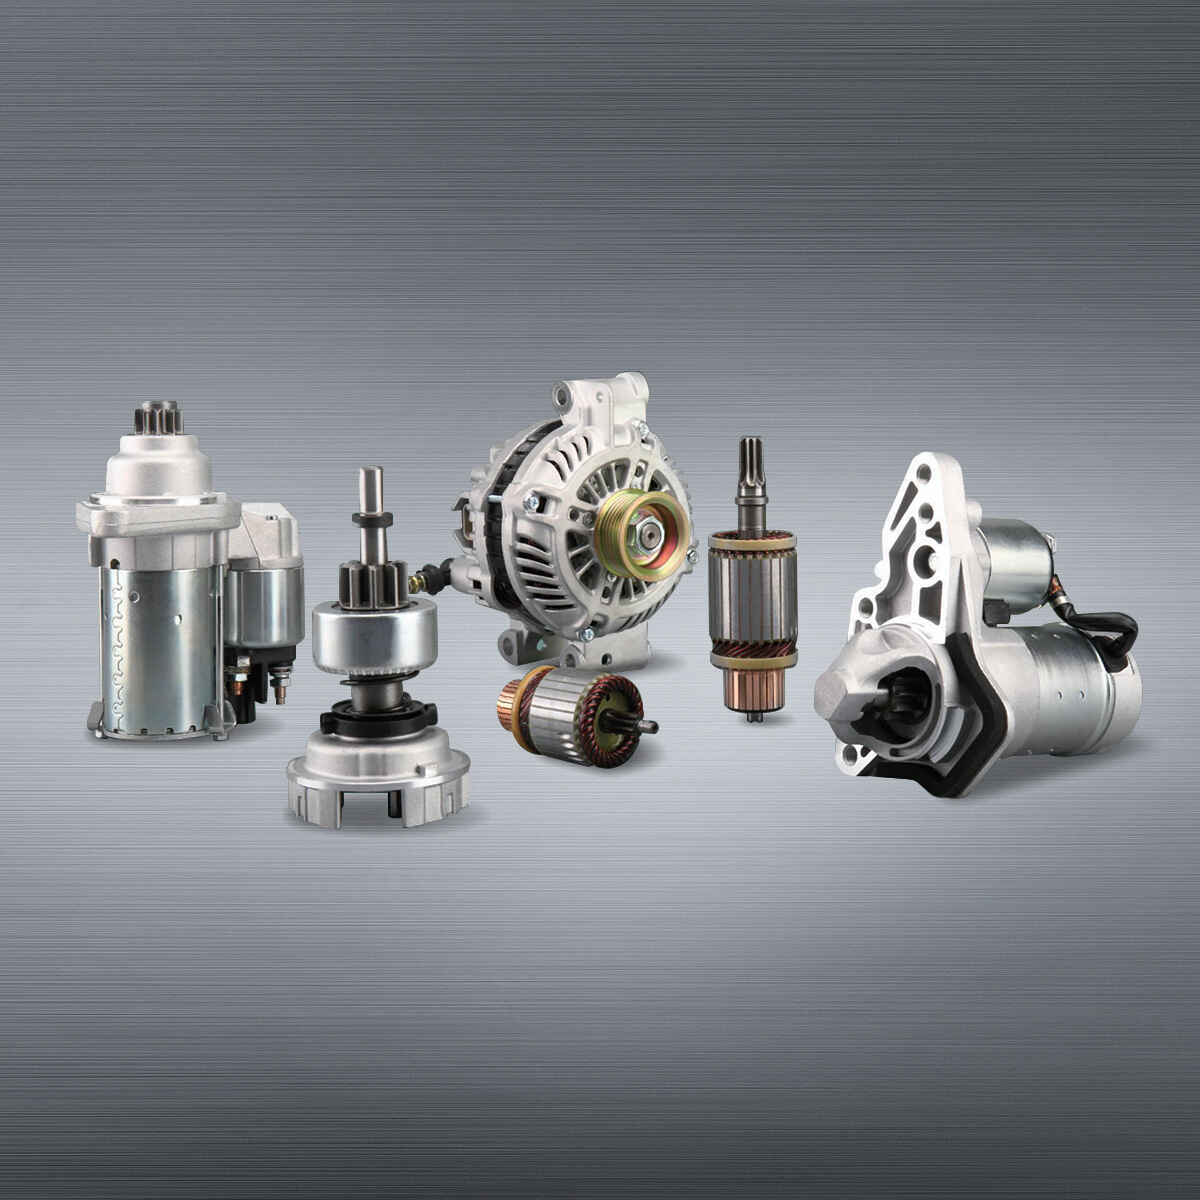 [STARTER] - [loosoo auto parts] Loosoo starters are manufactured to exact specifications by world-class engineers. As a strong and solid company, we have the ability to produce aftermarket parts, rebuilds, and new (OEM) designs to original specifications. For the OE Catalog and more information, please send your inquiry. We will provide a reliable solution at your service.